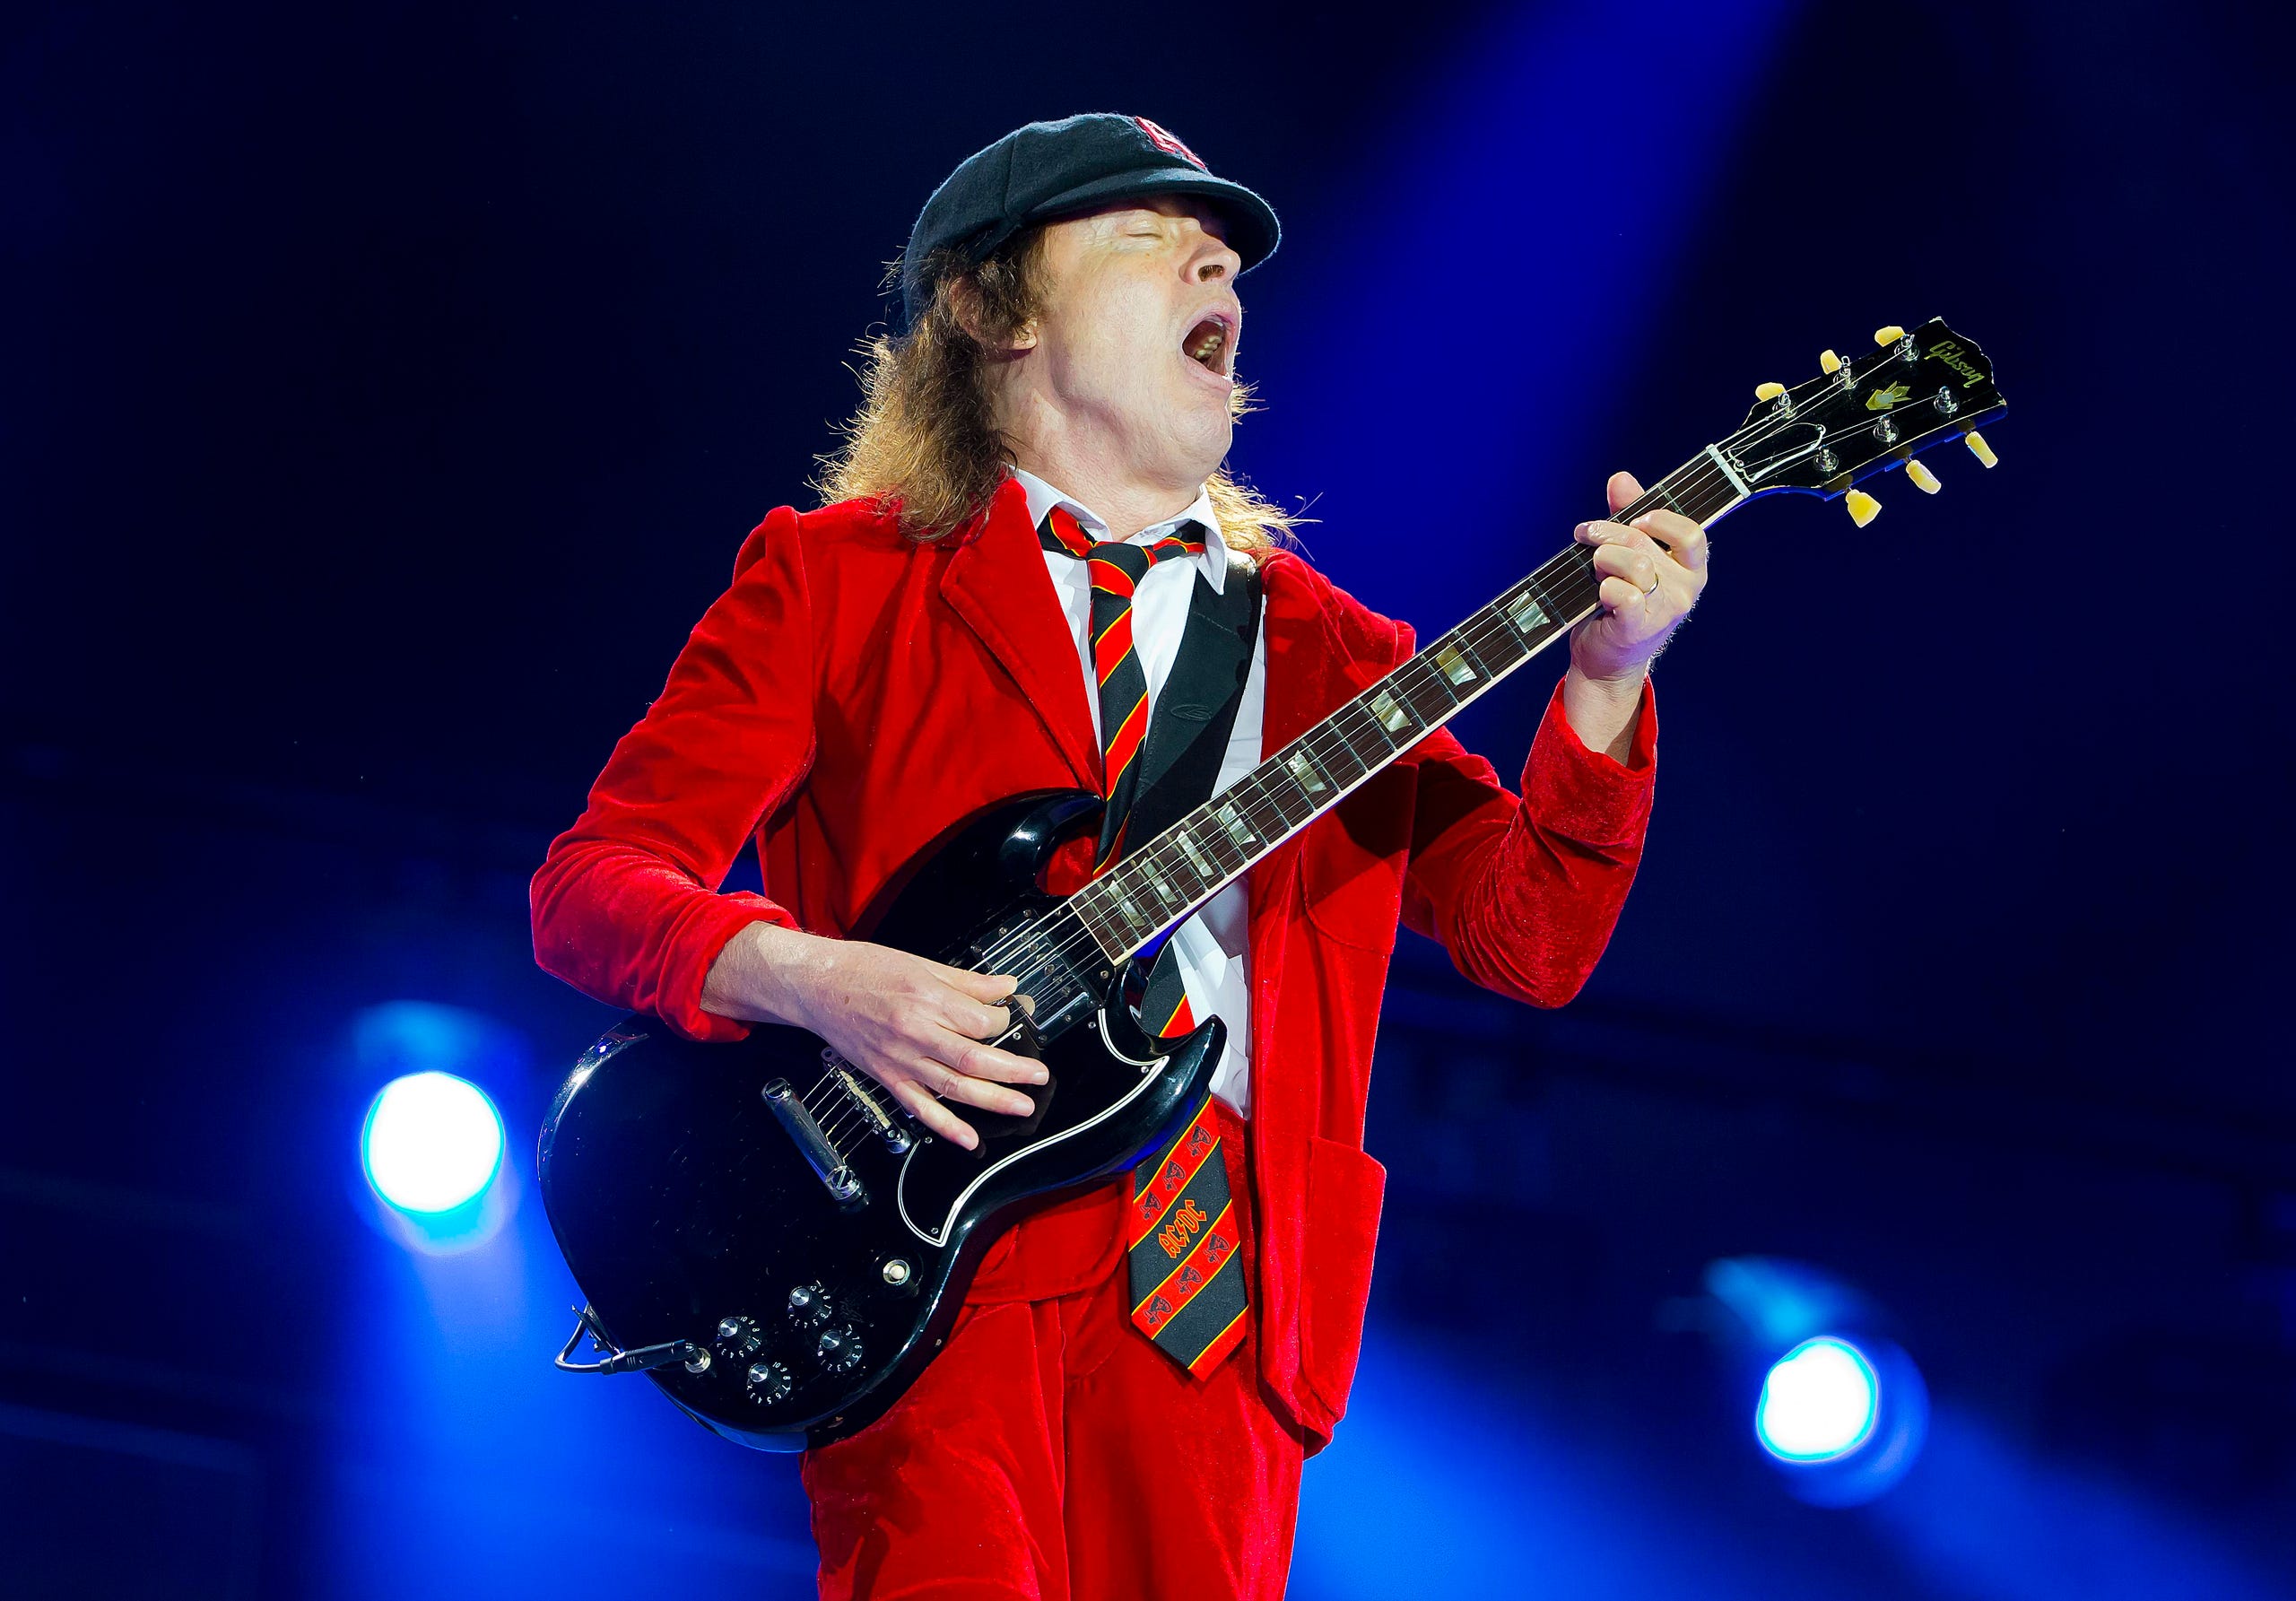 In a&nbsp;2014 Reddit AMA,&nbsp;AC/DC's Angus Young described the time&nbsp;his guitar amplifier caught on fire while he was recording his the solo for 1977's &quot;Let There Be Rock.&quot; &quot;Yes, it was on fire and I had to keep playing until the end, because my brother was in the control room, and yelling out 'KEEP GOING!' &ndash; so I had to keep going until the thing kind of went into meltdown,&quot; he wrote. &quot;And on this album, 'Rock or Bust,' we had the same thing ... my amp just went on fire. And I didn't even know! I thought it was a cigarette going. But (producer Brendan&nbsp; O'Brien) was shouting out, 'Ang, you're on fire!' &quot;<br /> &nbsp;